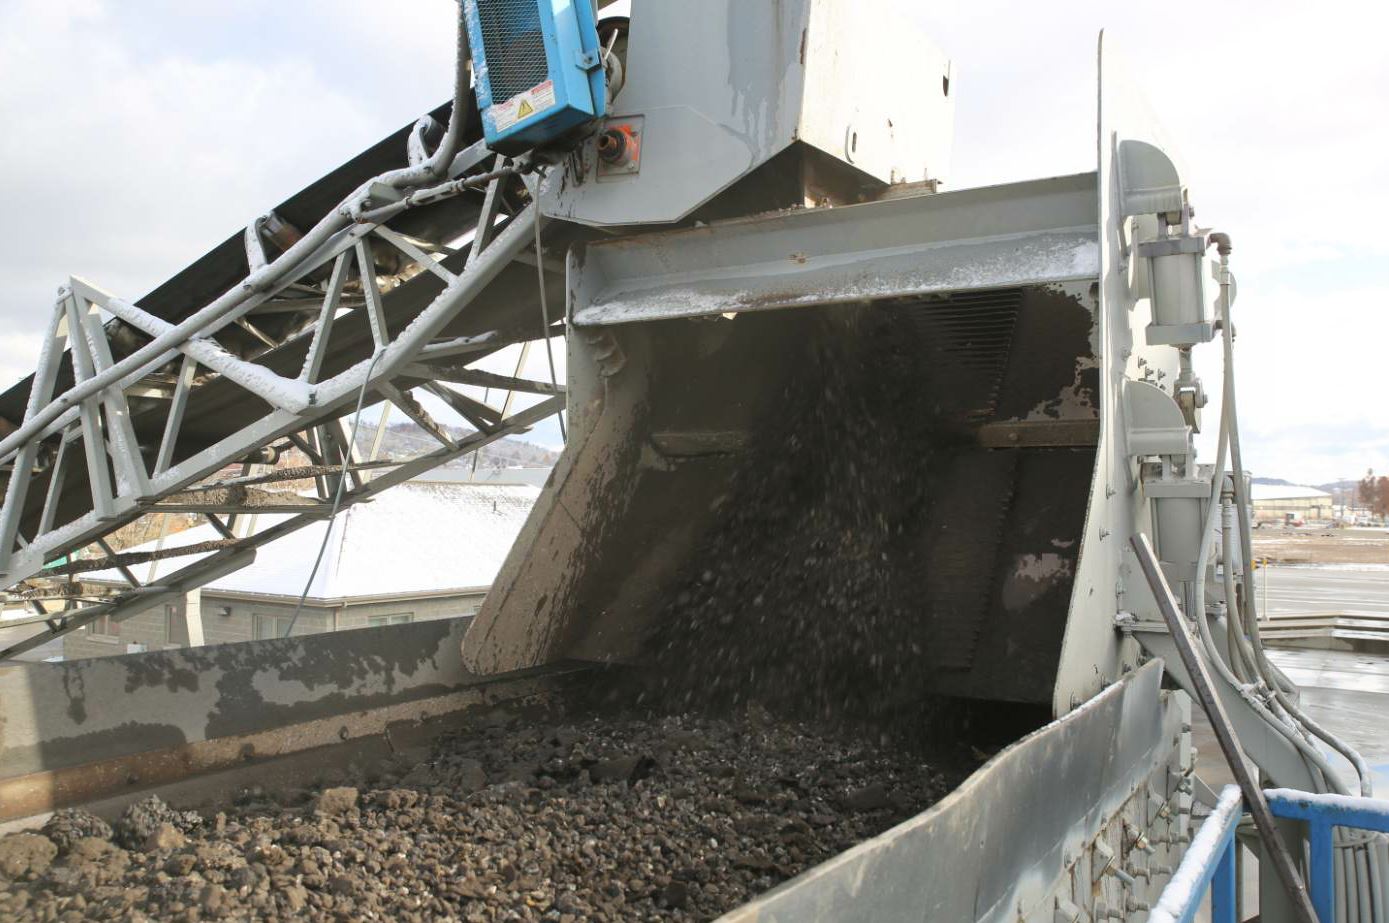 If too much material is passing over the screen, but there is no plugging or blinding, the operation may be feeding too much material across the screen or may be running the screen too fast. Rather than reducing the tonnage, the owner may elect to use a larger screen or add an additional screen downstream to further screen material. Photo courtesy Eagle Crusher, Galion, Ohio.